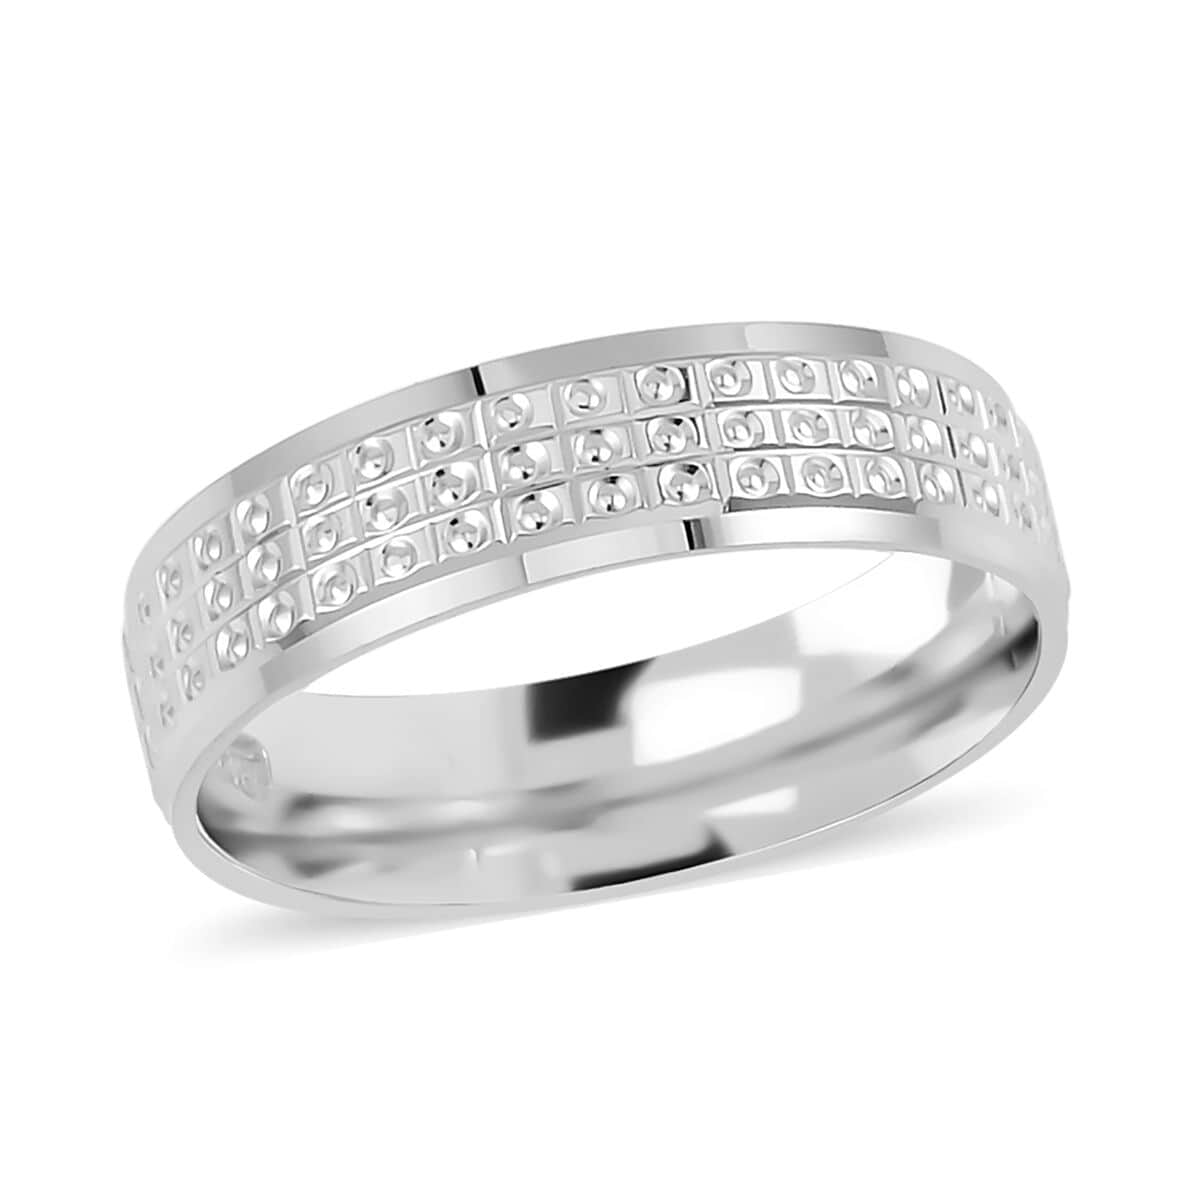 950 Platinum Textured Band Ring (Size 10.0) 6 Grams (Del. in 7-10 Days) image number 0